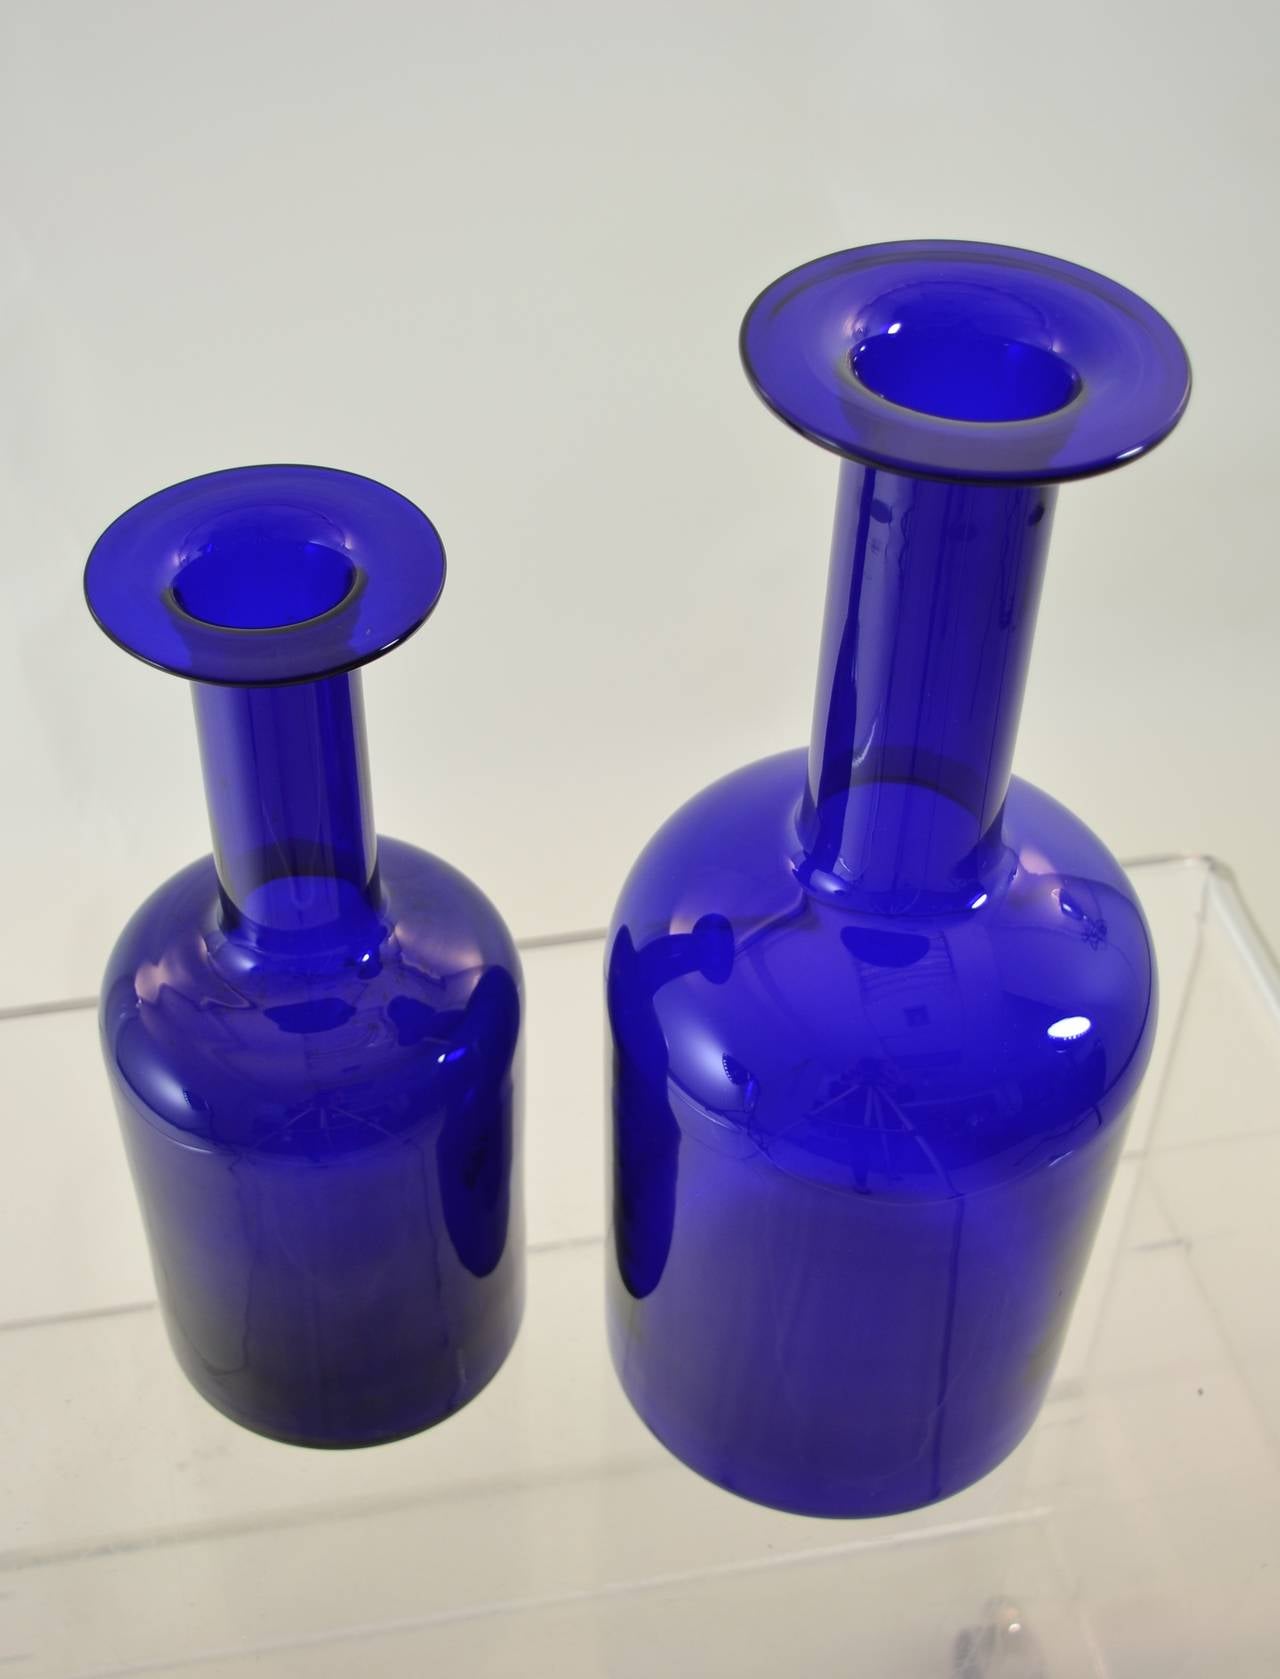 Wonderful deep cobalt glass in class Holmegaard vases. Two sizes: The larger: inches height, 5.75 inches diameter and the smaller: 12 inches height, 4.5 inches diameter.